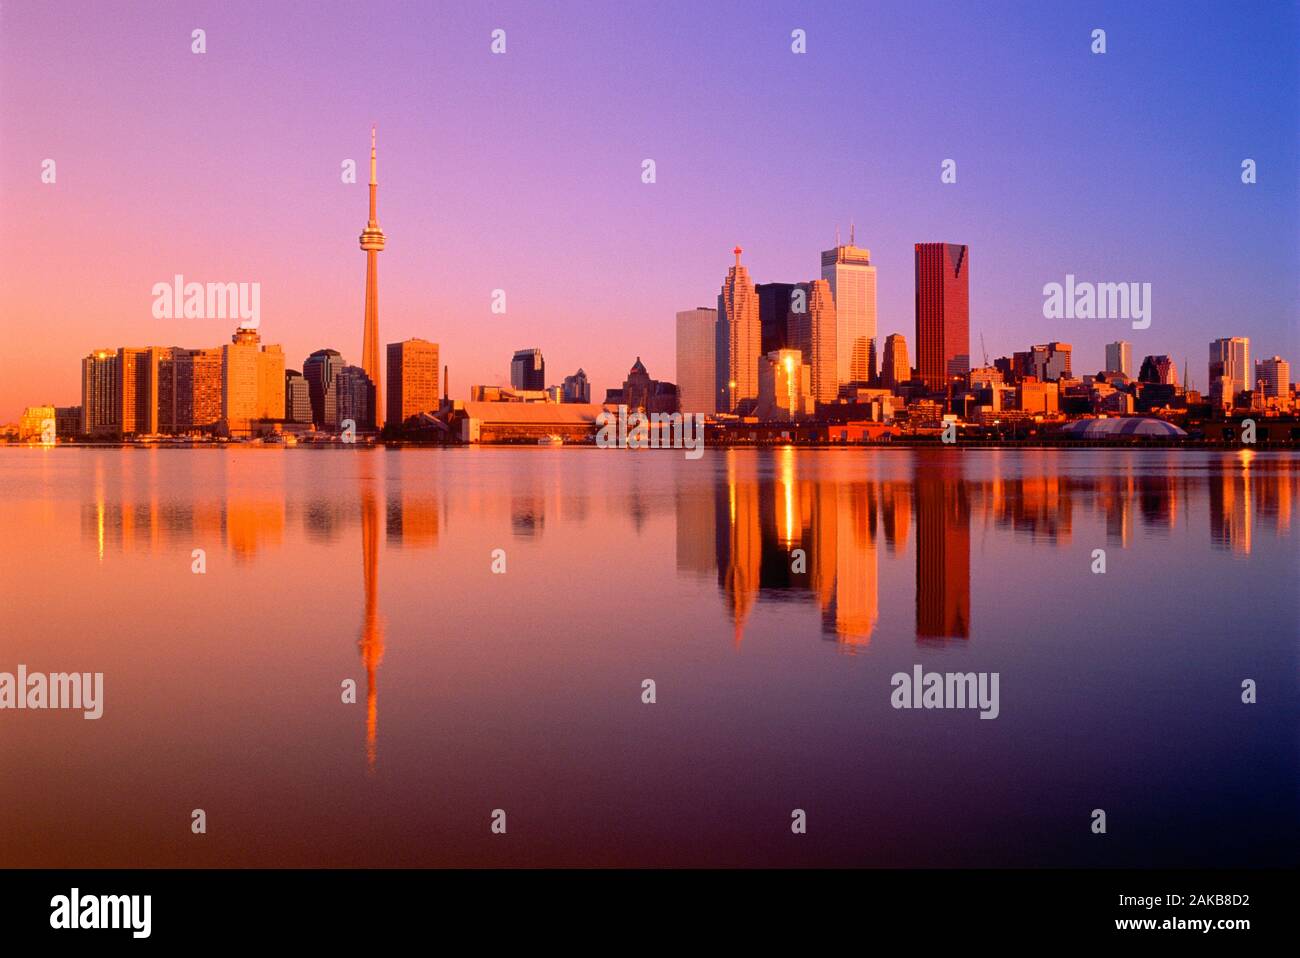 Cityscape with skyscrapers on waterfront at sunrise, Toronto, Ontario, Canada Stock Photo